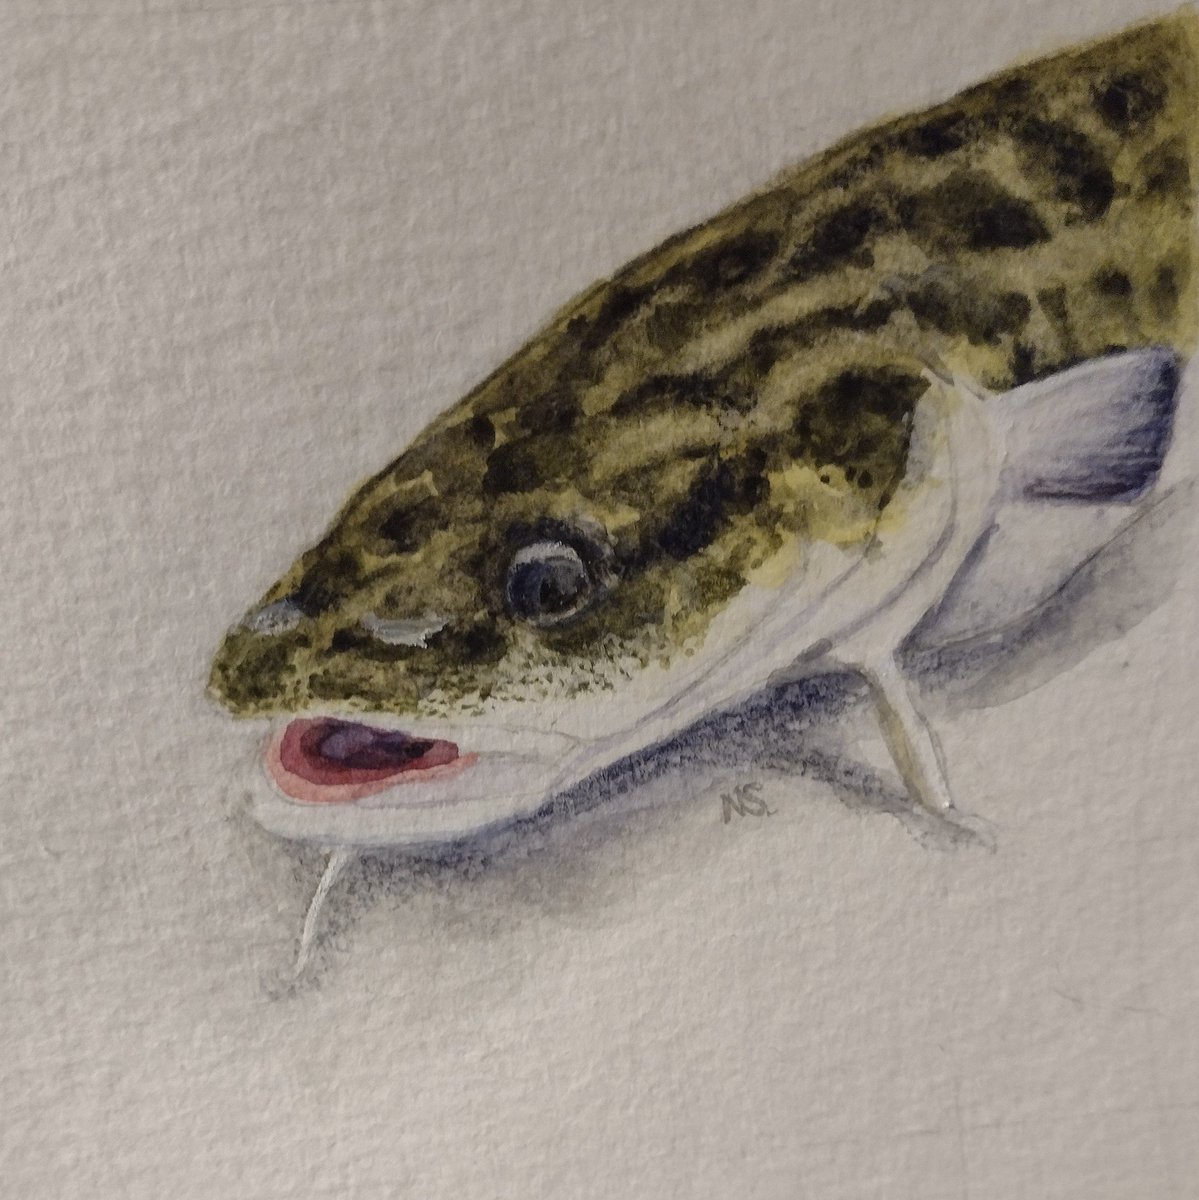 For this #SciArtSeptember #SundayFishSketch crossover prompt: favourite. The burbot, my all-time, number one, favourite fish.